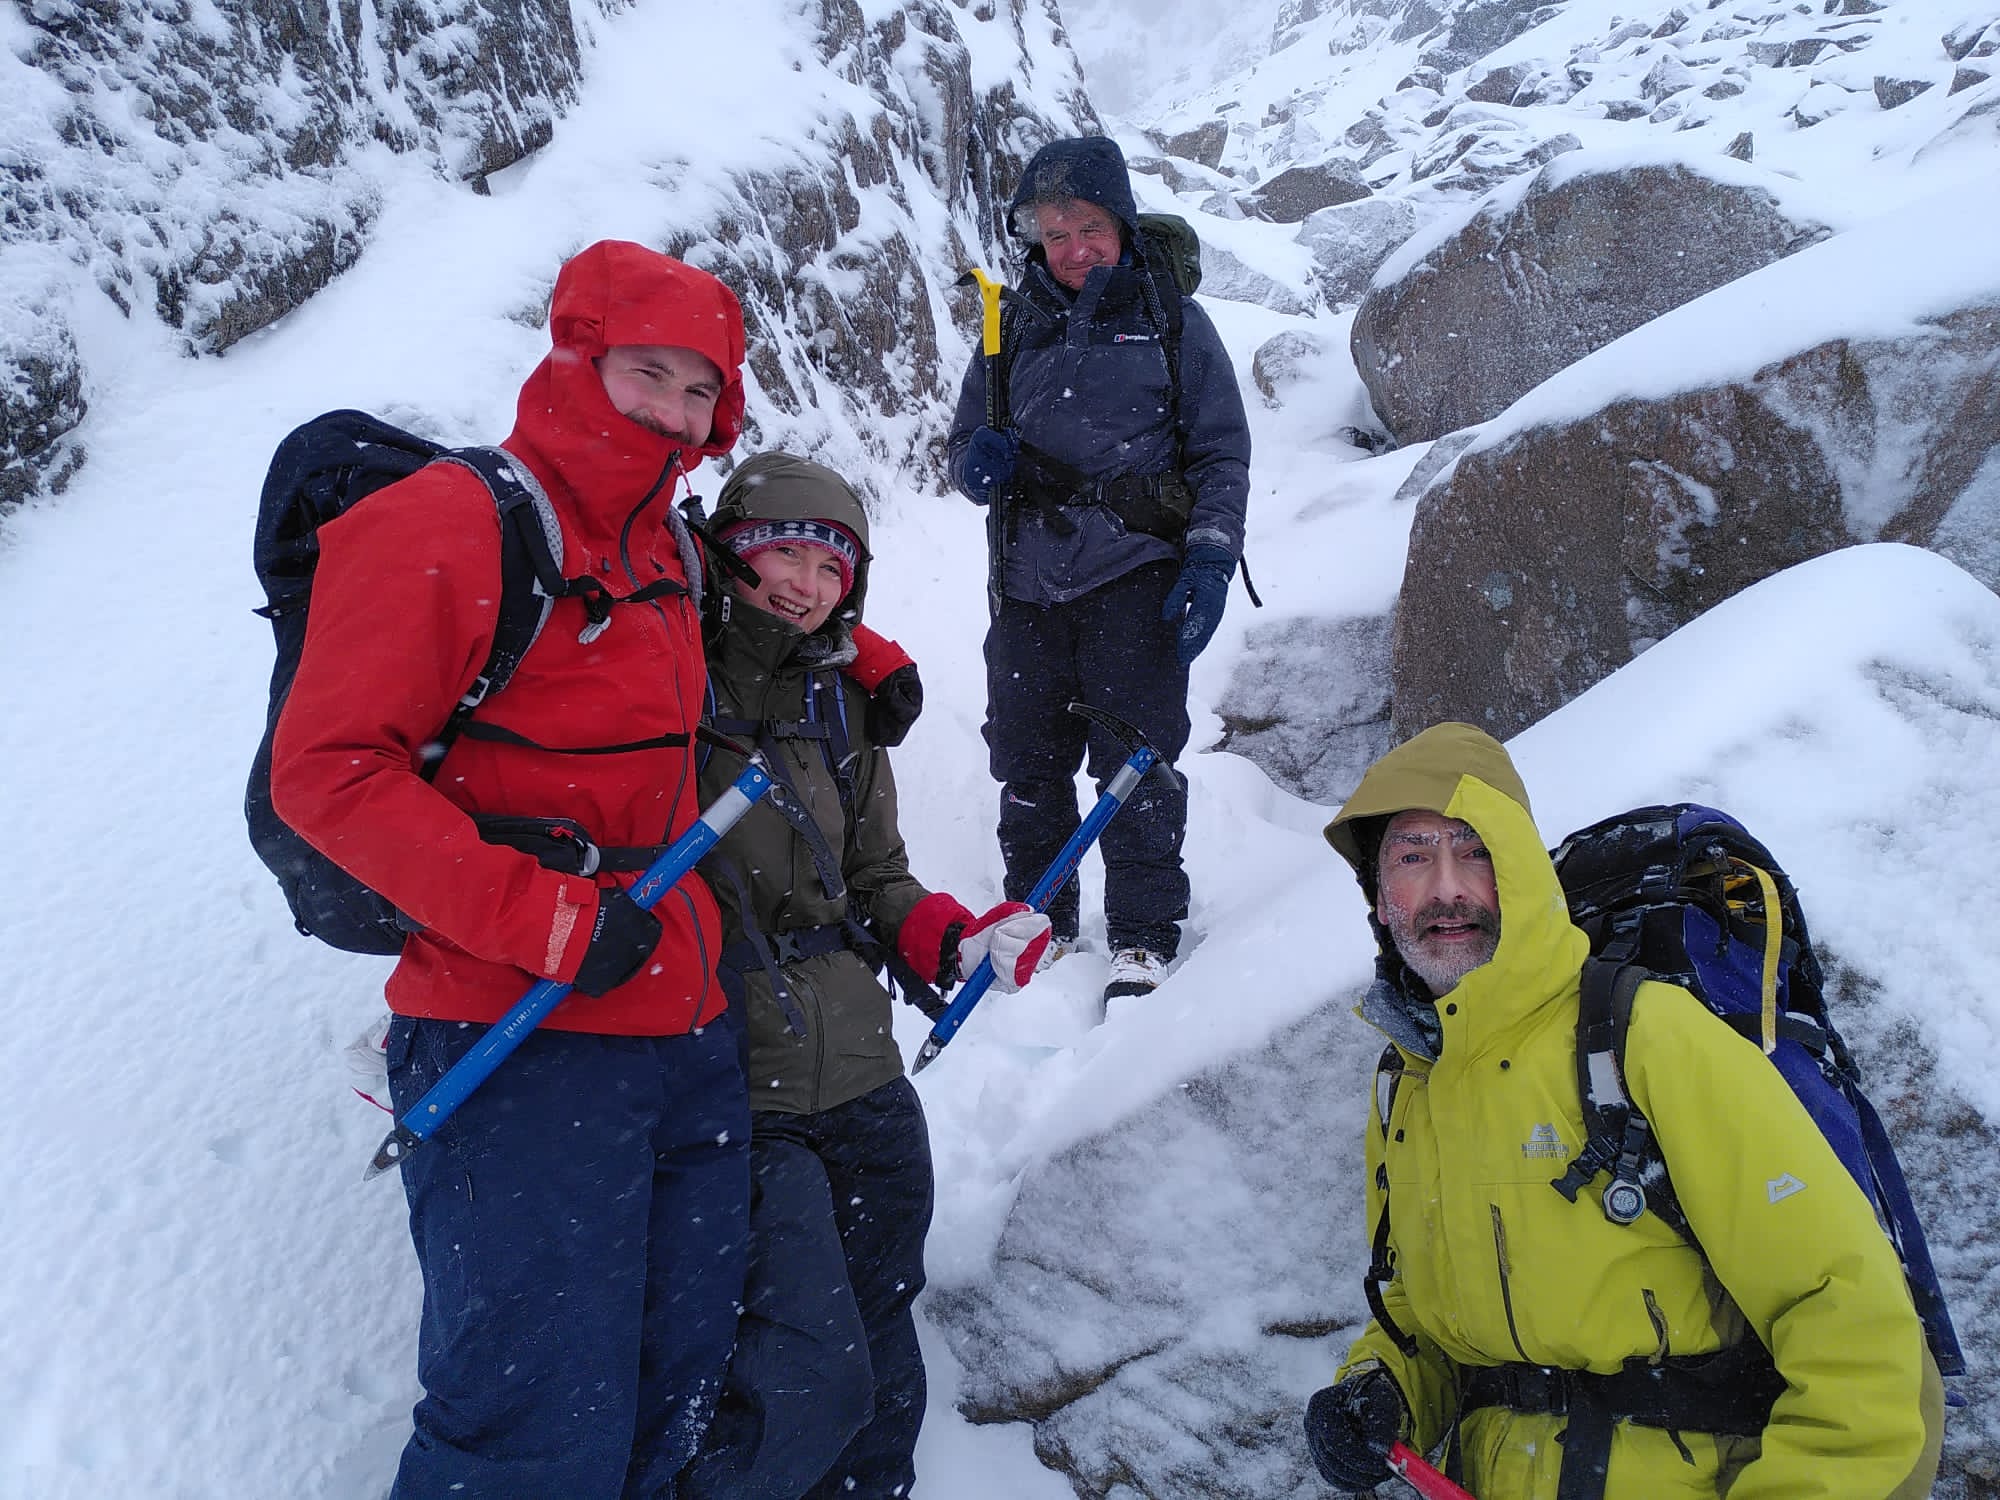 A group of mountaineers poses in the snow.